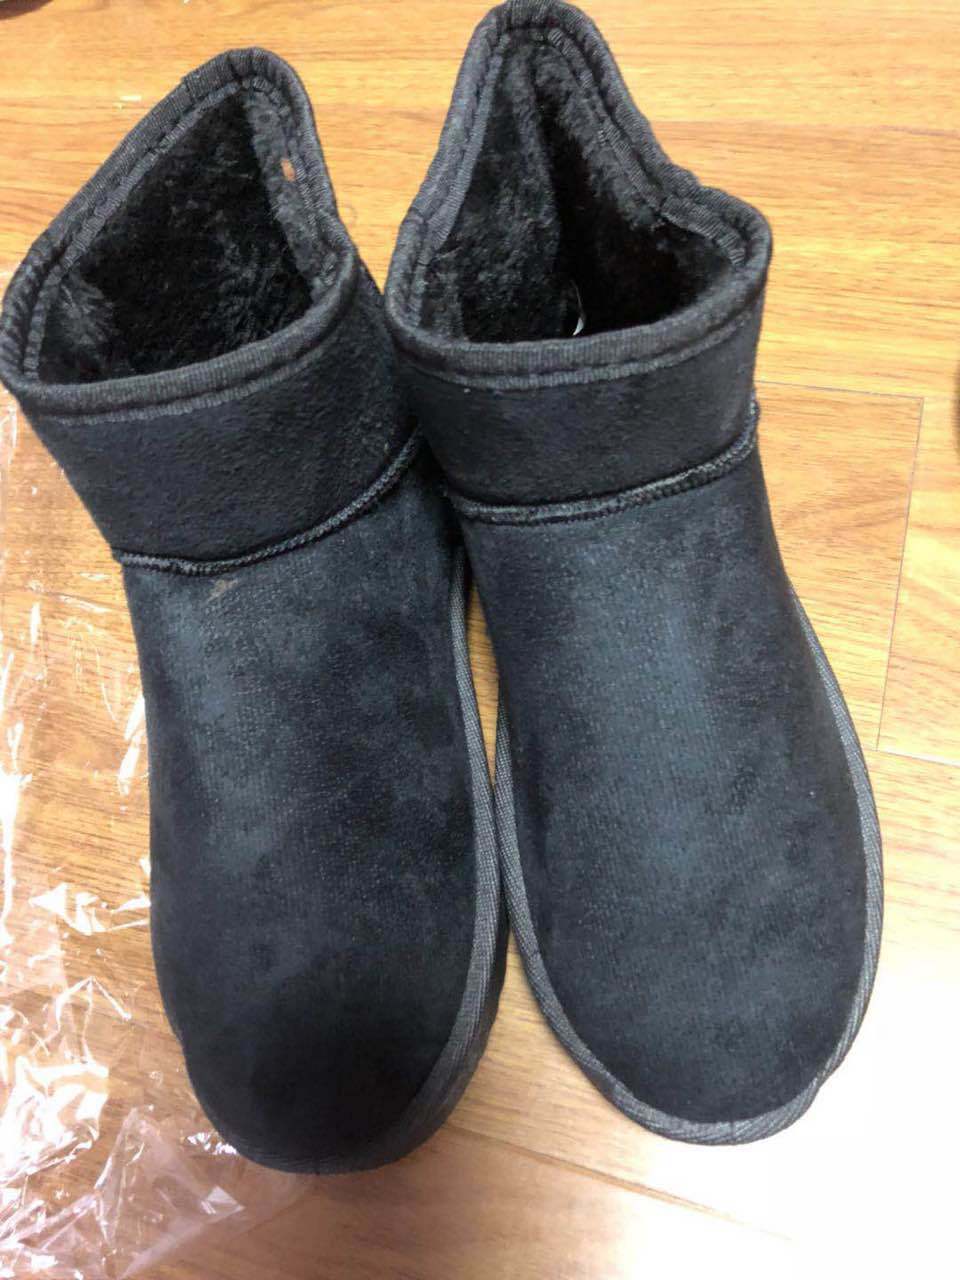 High/Top Quality for Snow Boots, Winter Boots, Sheepskin Ladies Boots